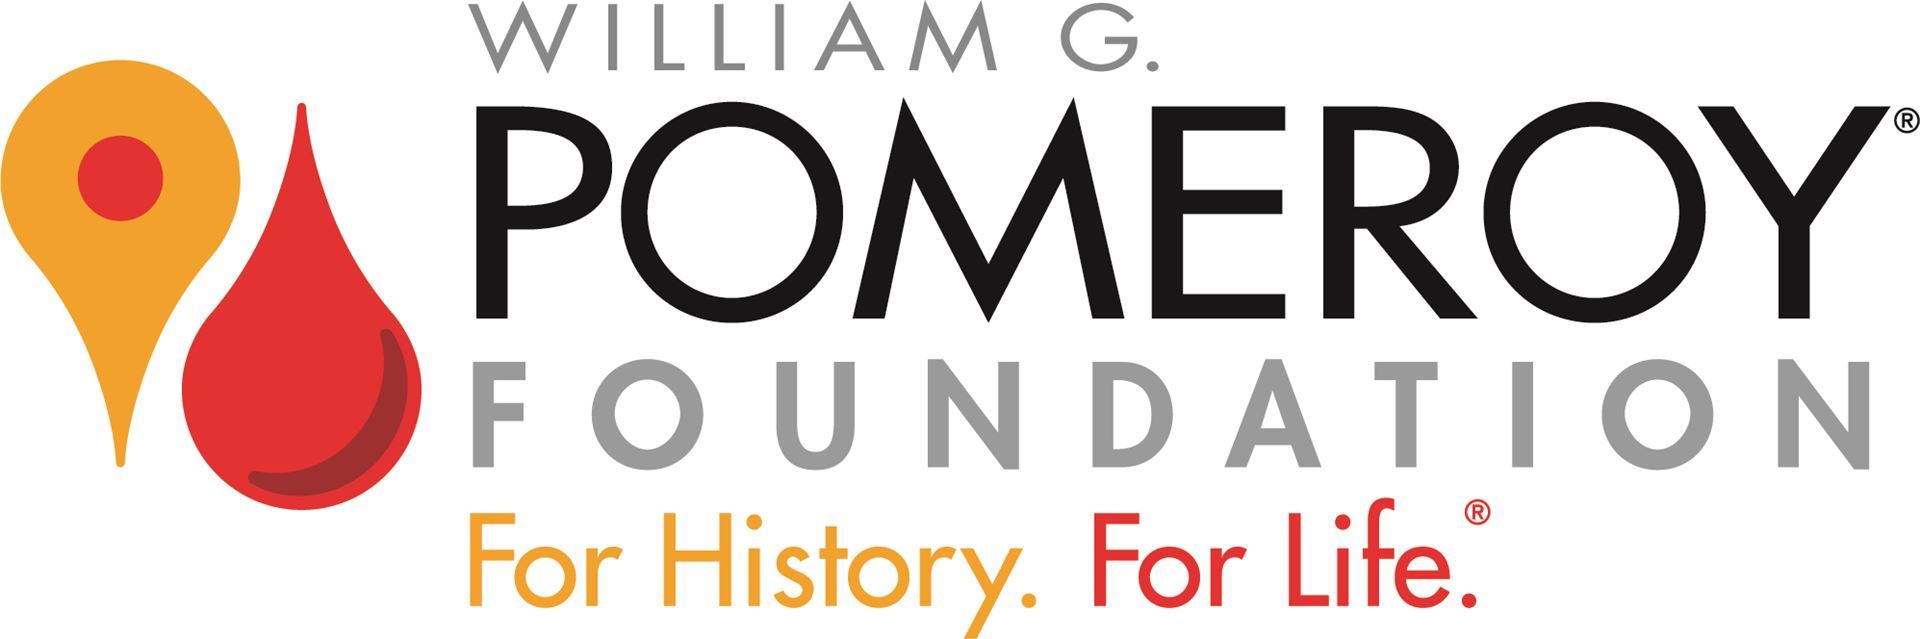 William G. Pomeroy Foundation: For History. For Life.